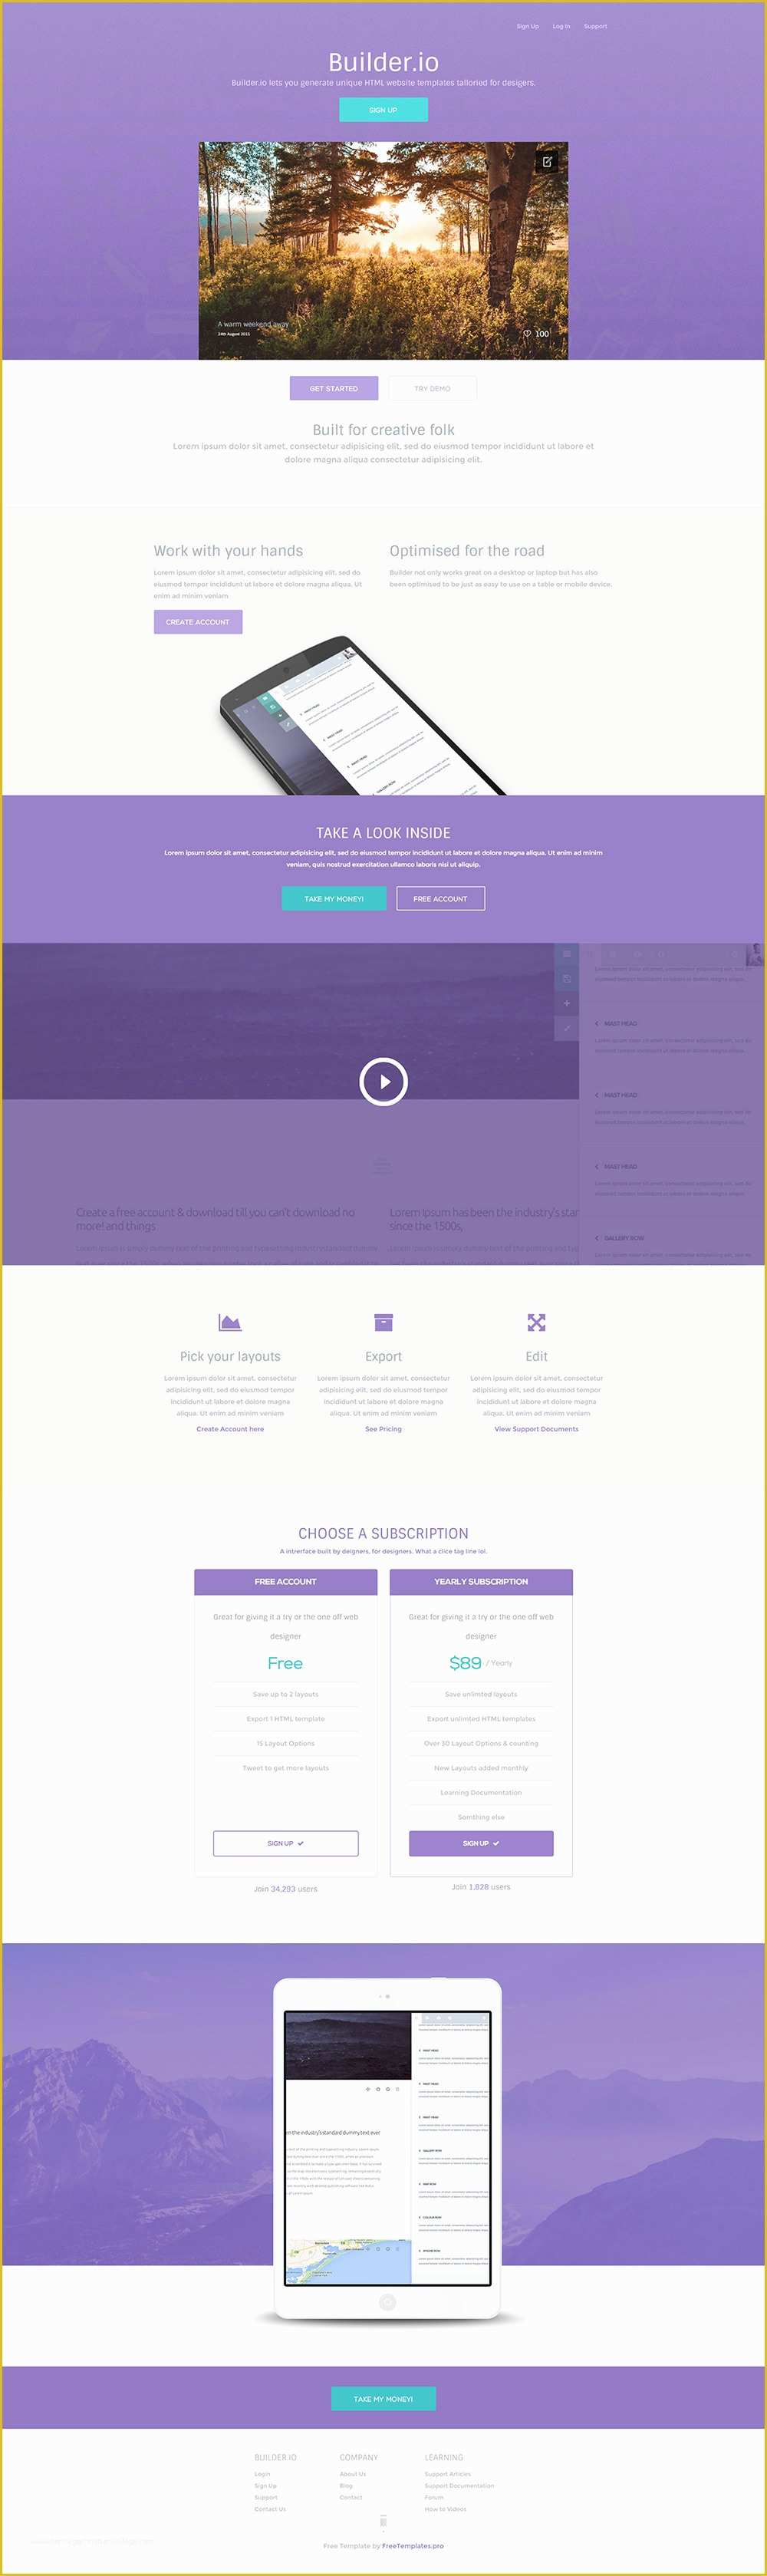 Html Web Application Templates Free Download Of Builder A Free Vibrant Web App HTML Template